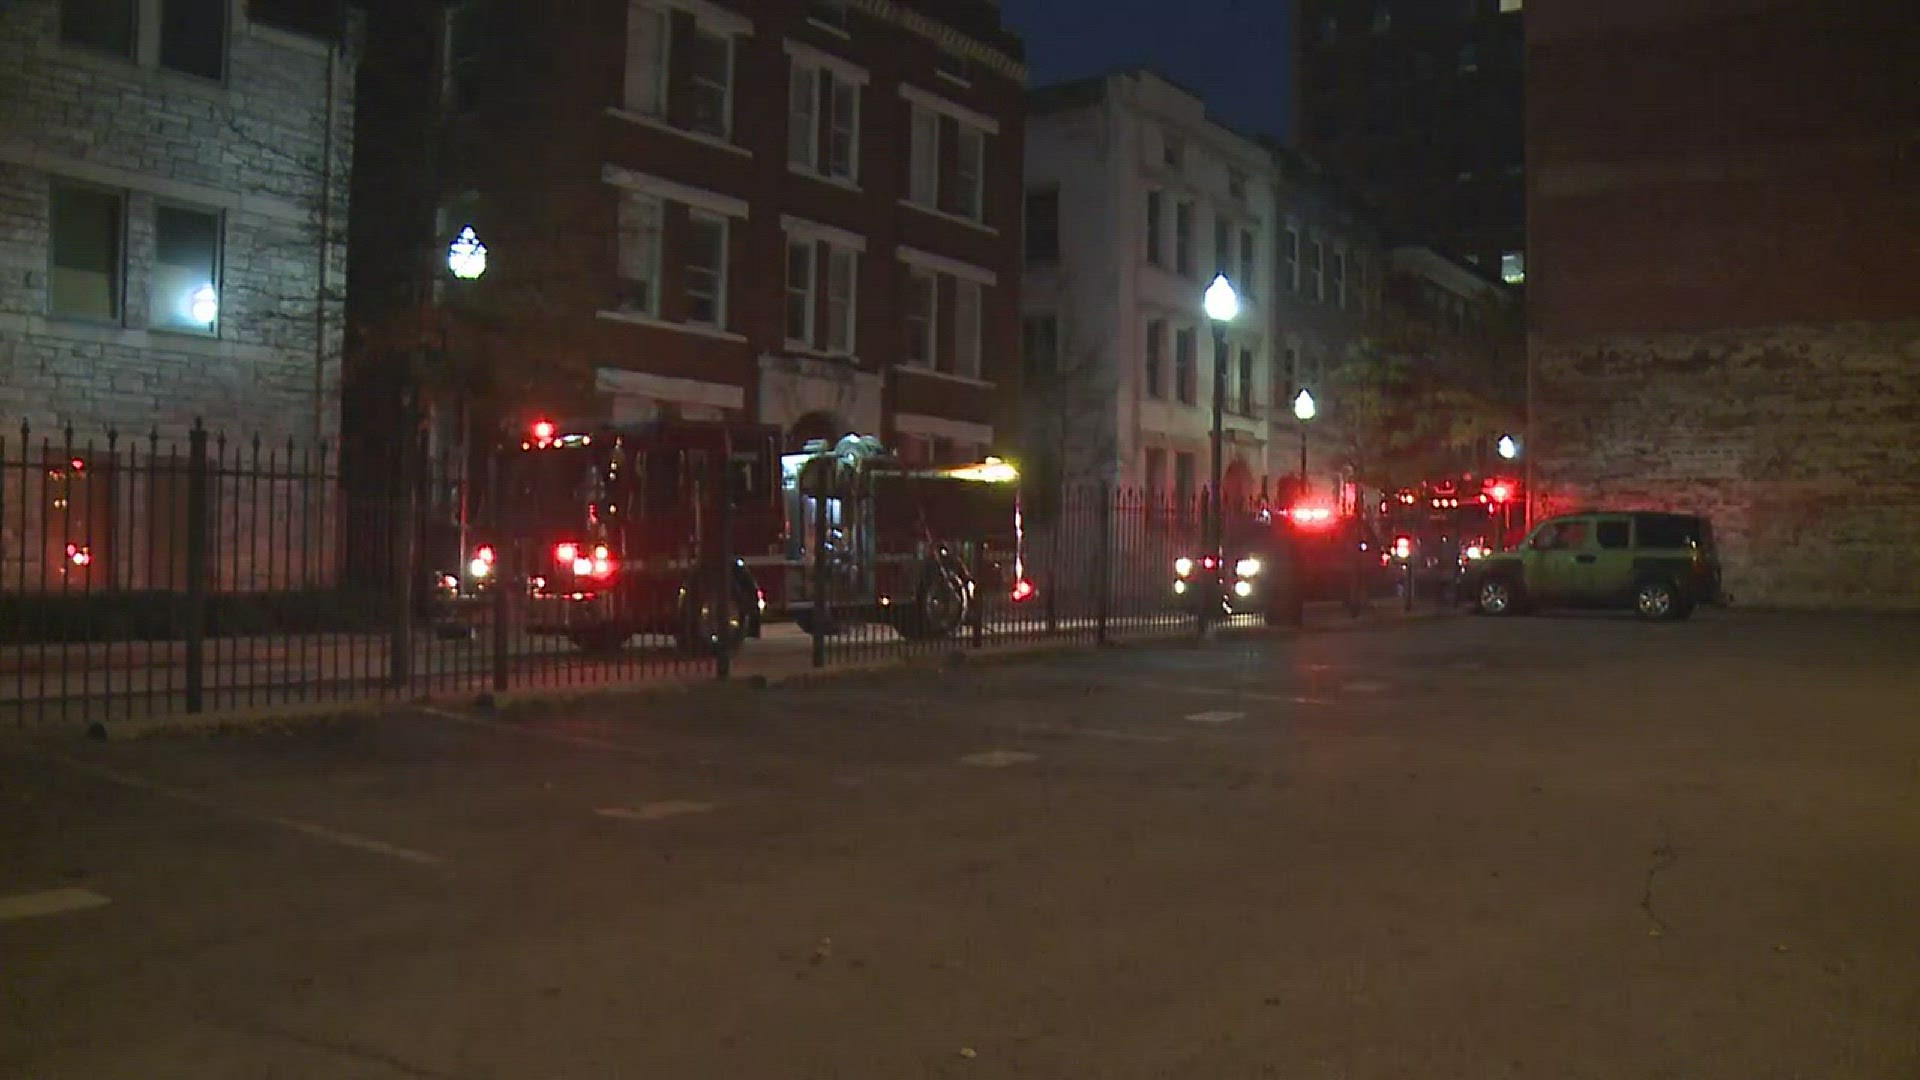 Fire crews said they put out a fire in downtown Knoxville off Market Street Tuesday morning.